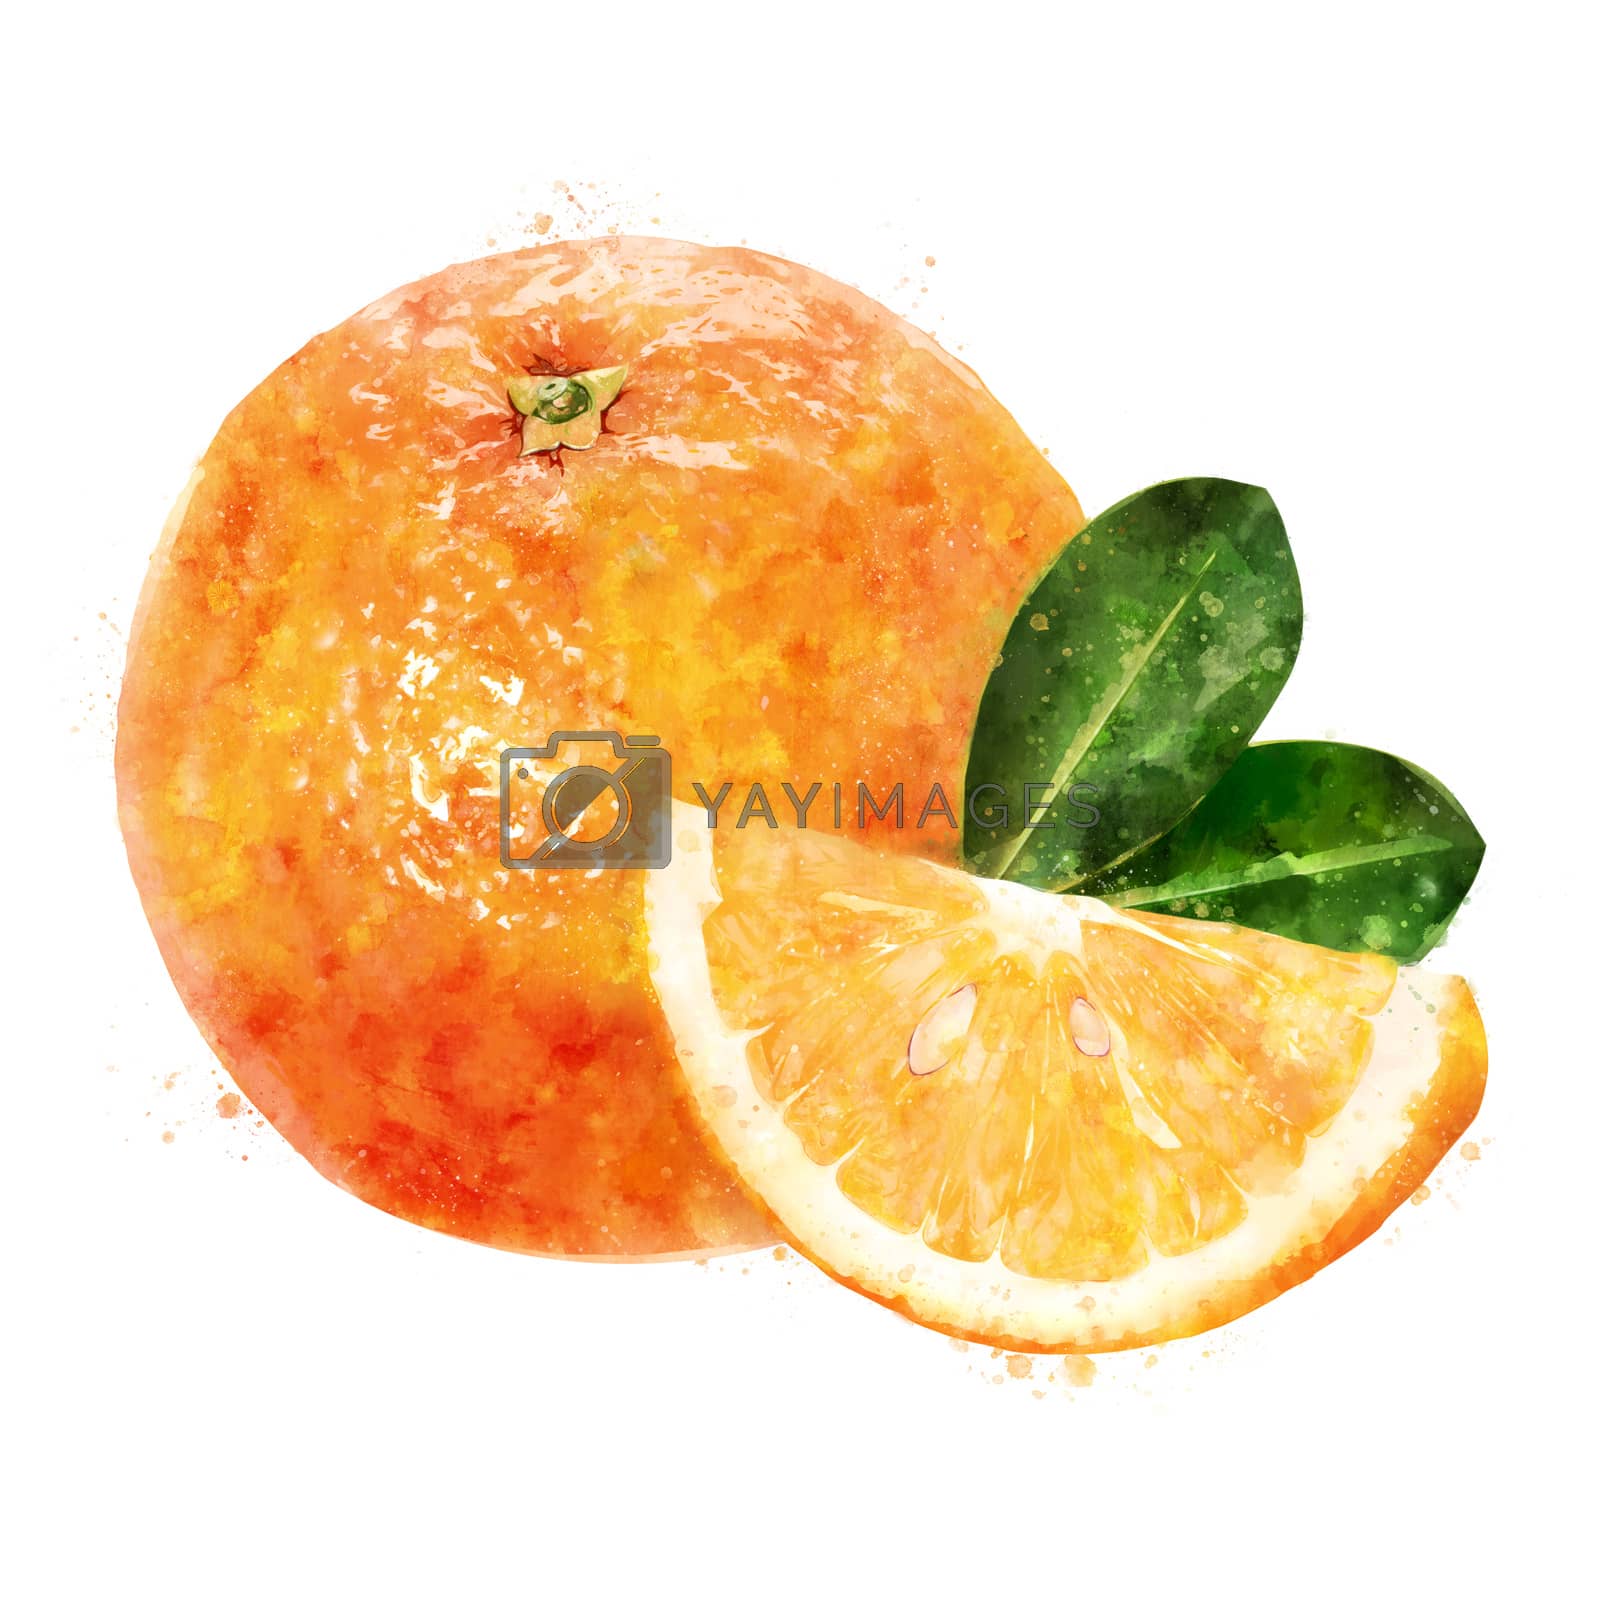 Royalty free image of Orange on white background. Watercolor illustration by ConceptCafe